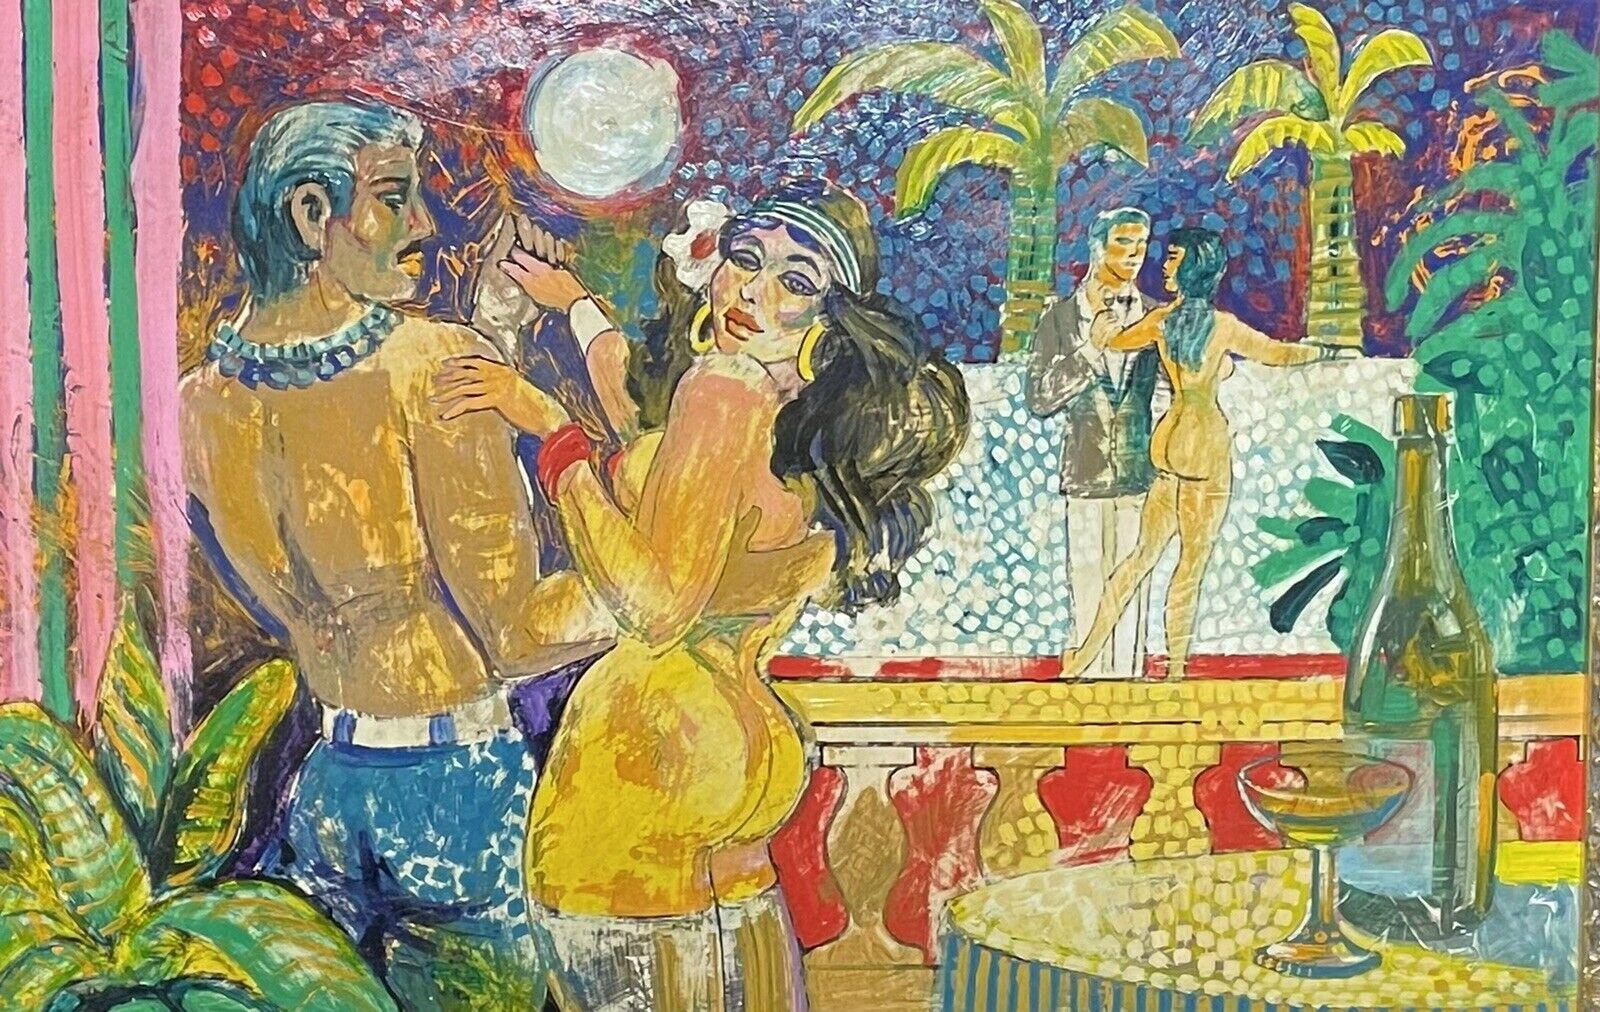 Unknown Figurative Painting - 1970's SIGNED OIL - PARTY GOERS NEW YEARS EVE SEMI NUDE DANCERS & PALM TREES